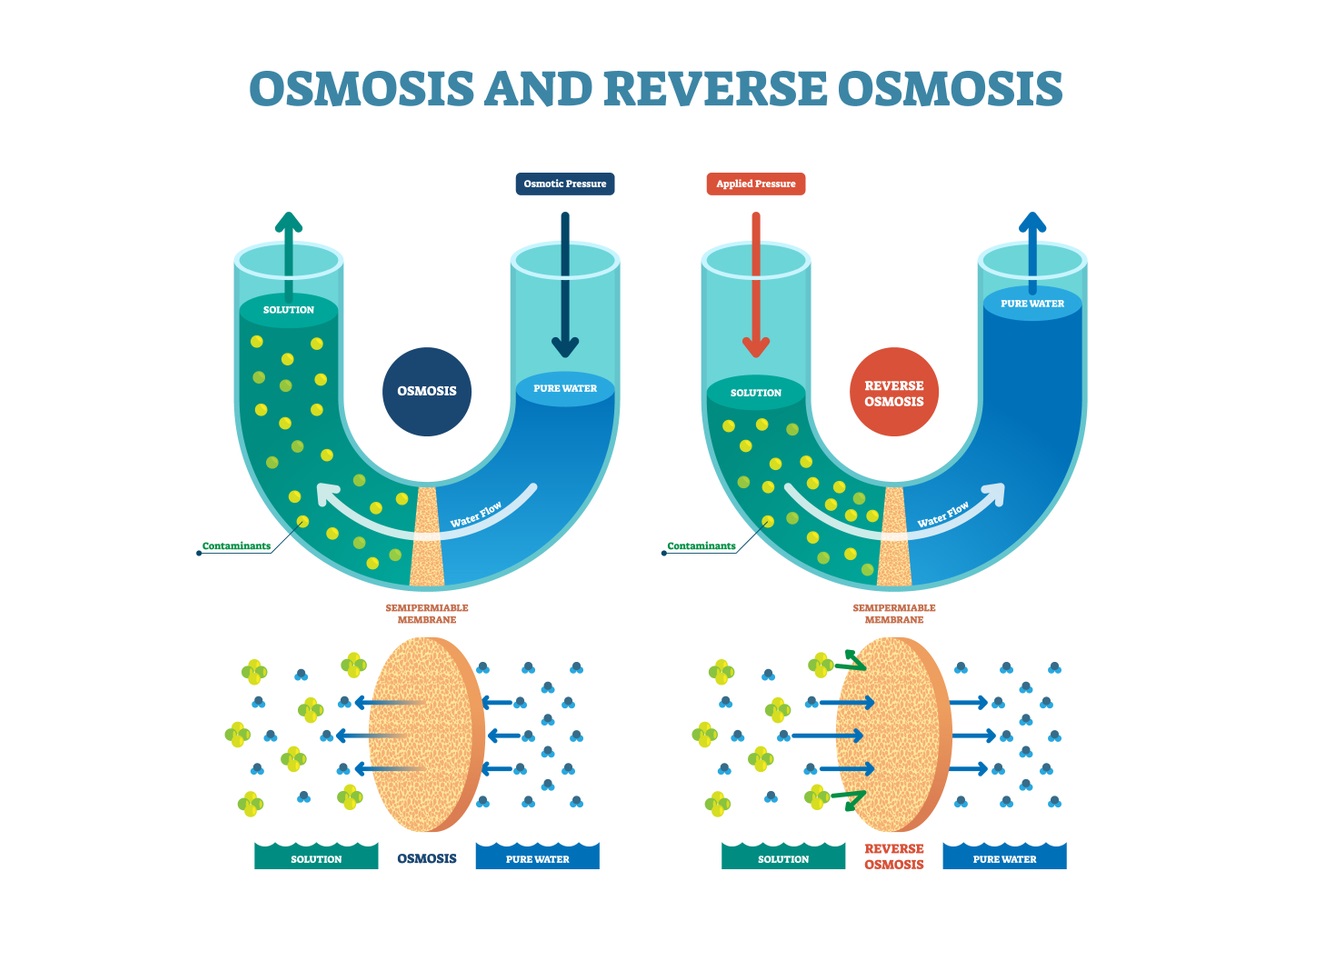 What Is Reverse Osmosis And How Does It Work?